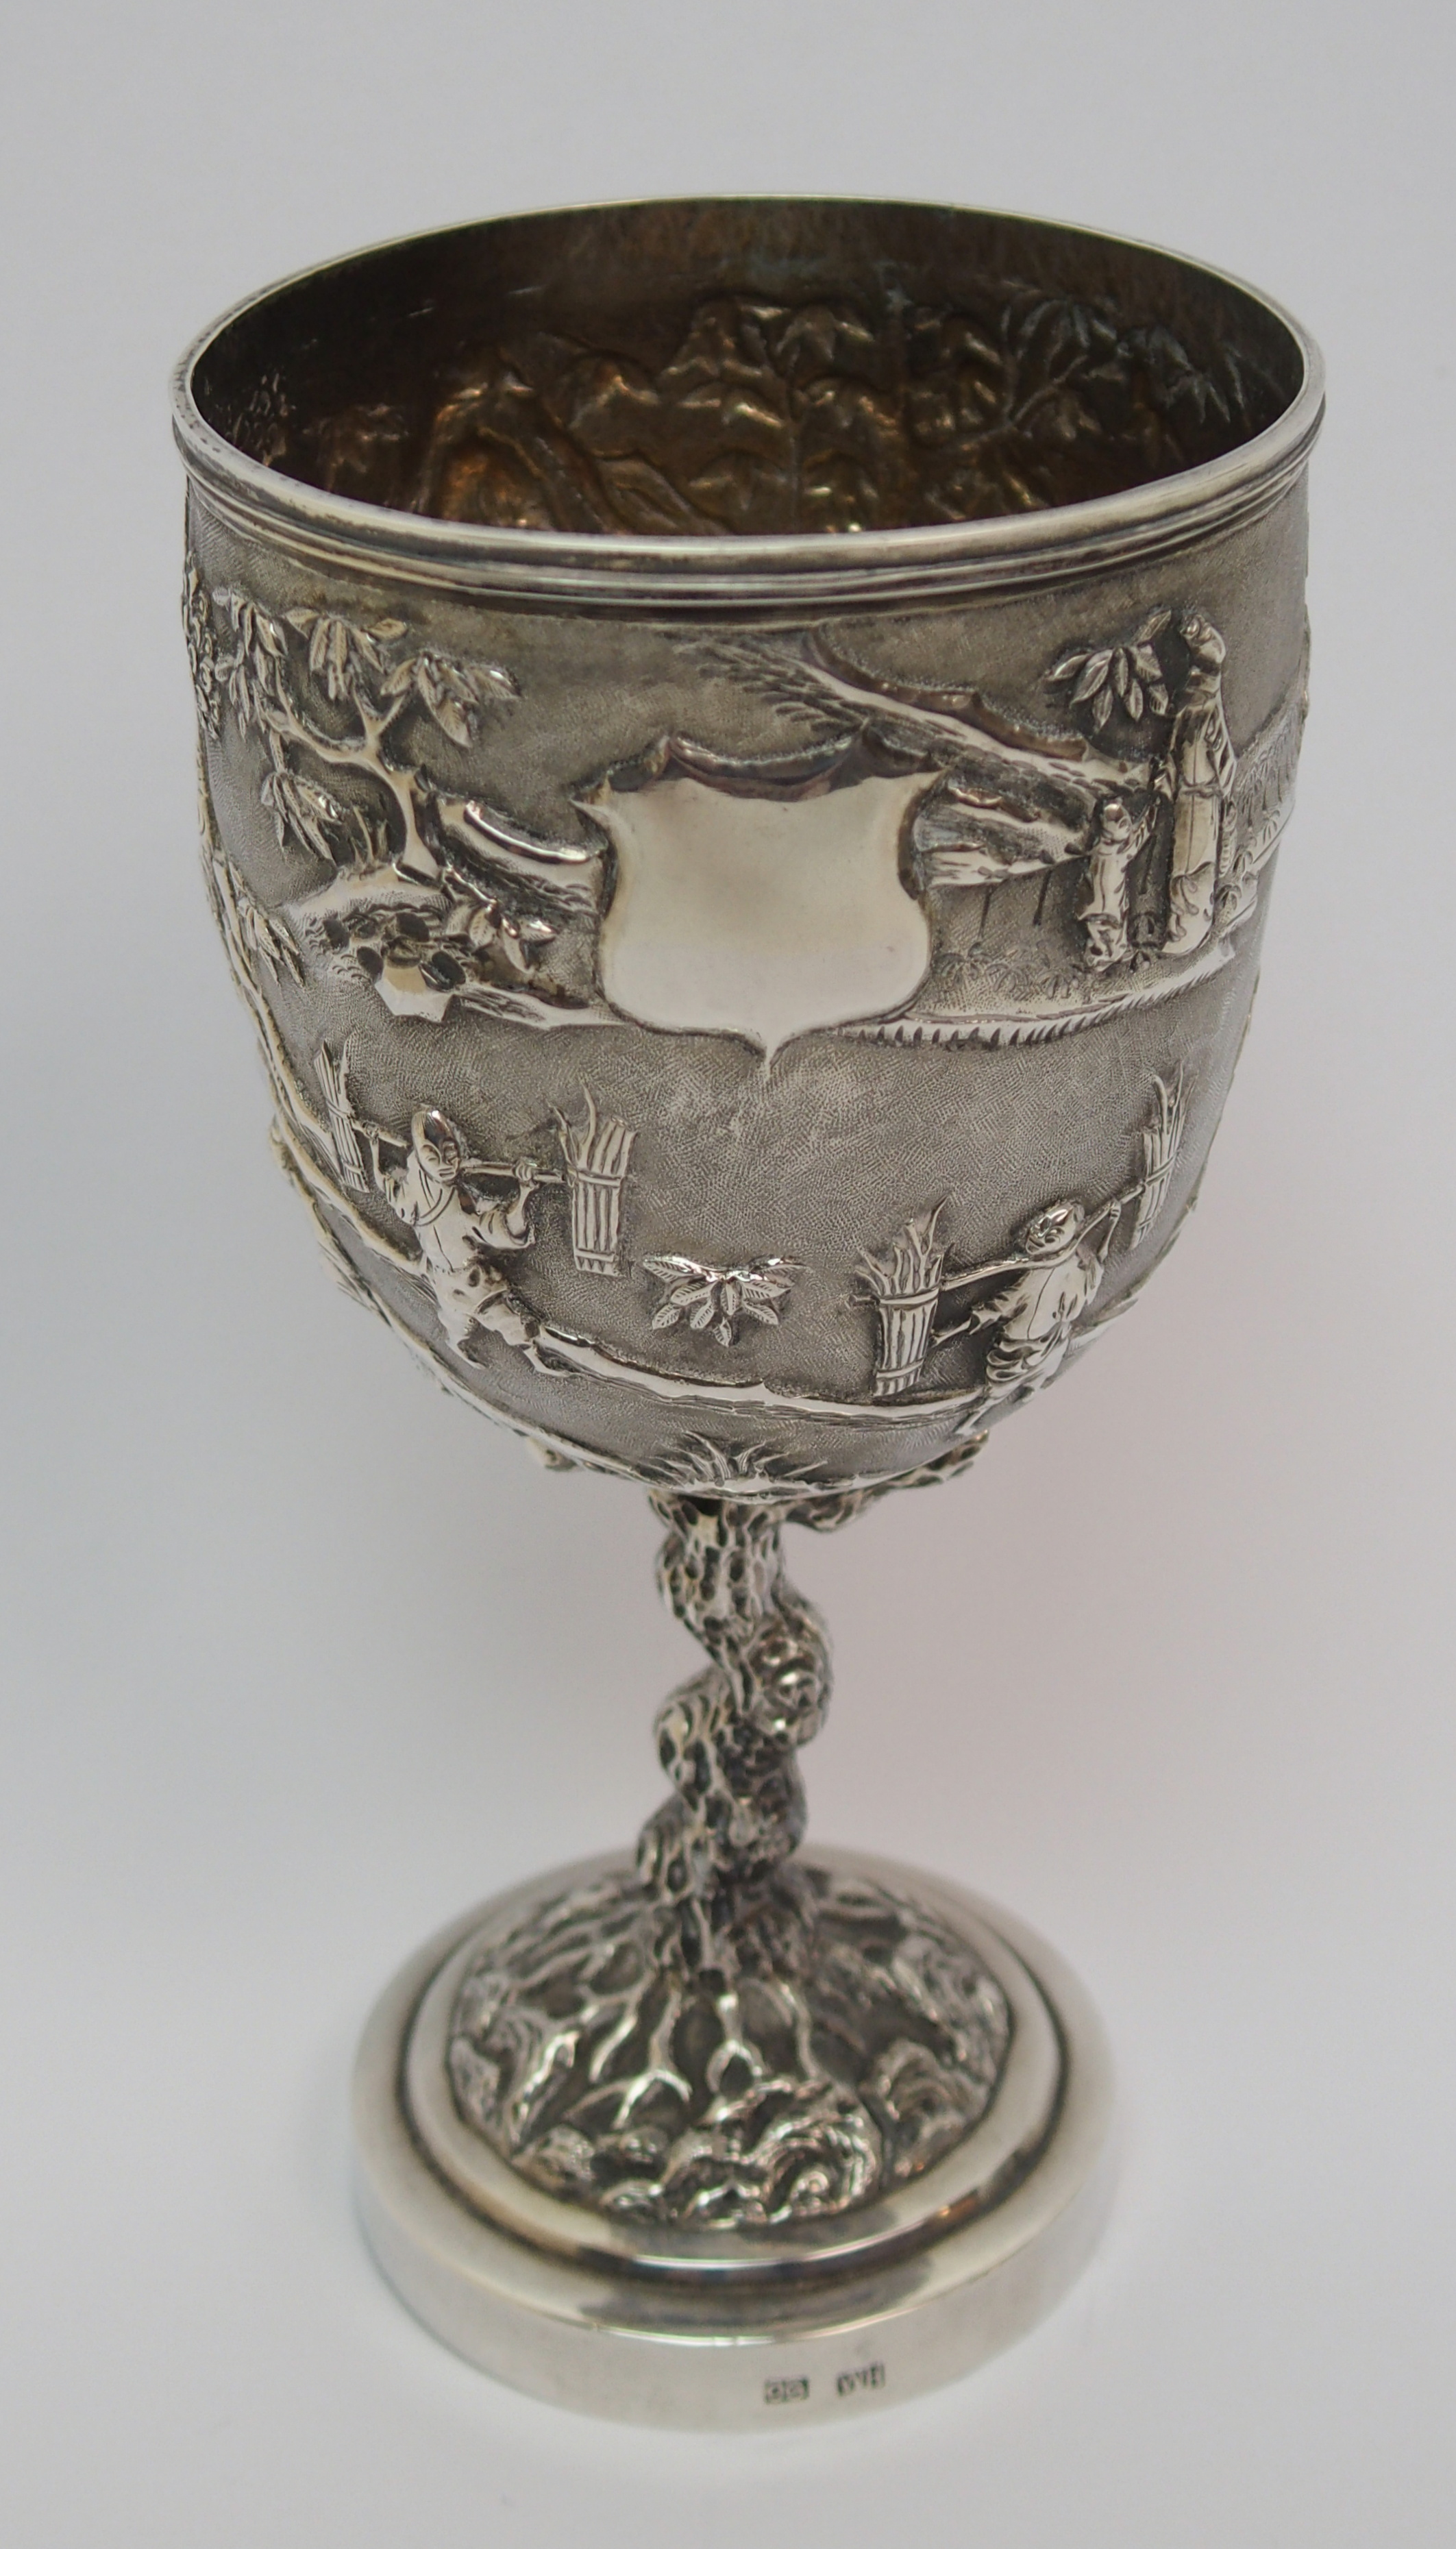 A Chinese Export silver goblet decorated with various figures in a mountainous landscape amongst